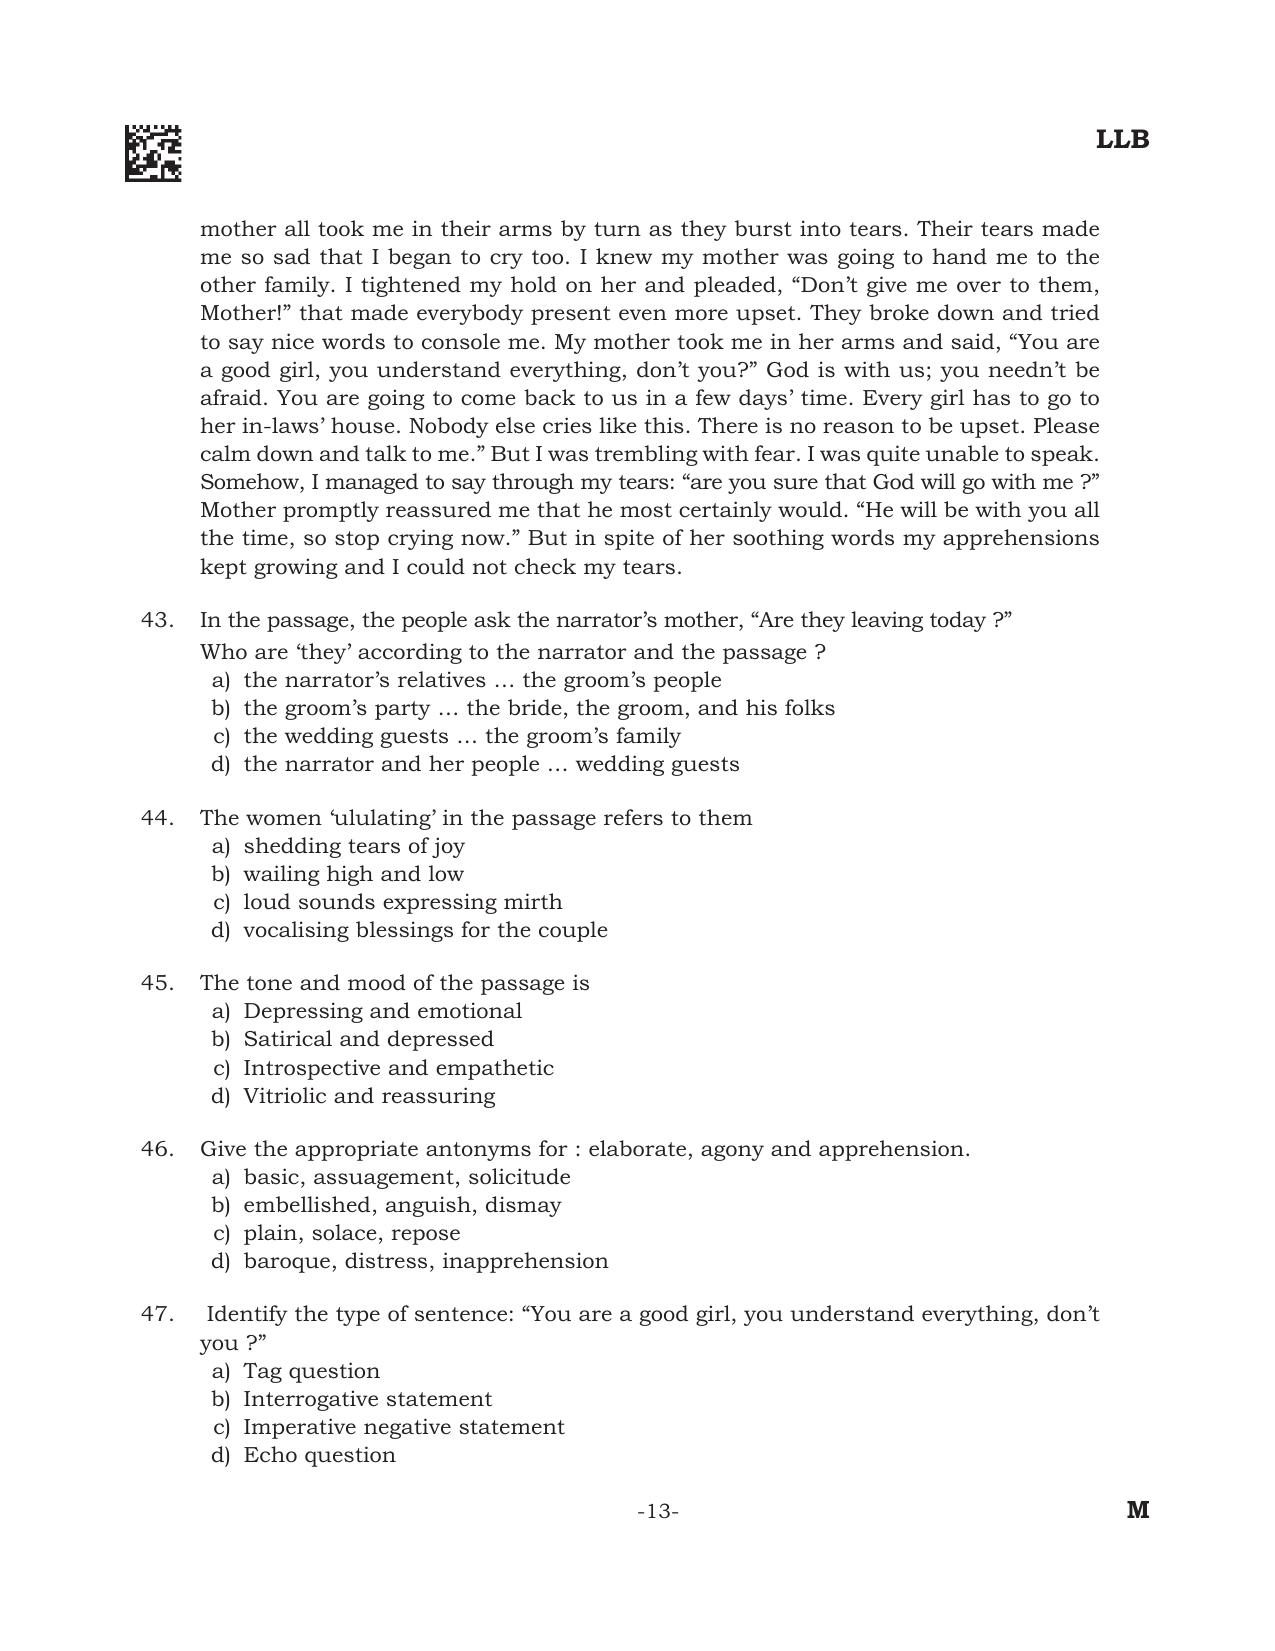 AILET 2022 Question Paper for BA LLB - Page 13